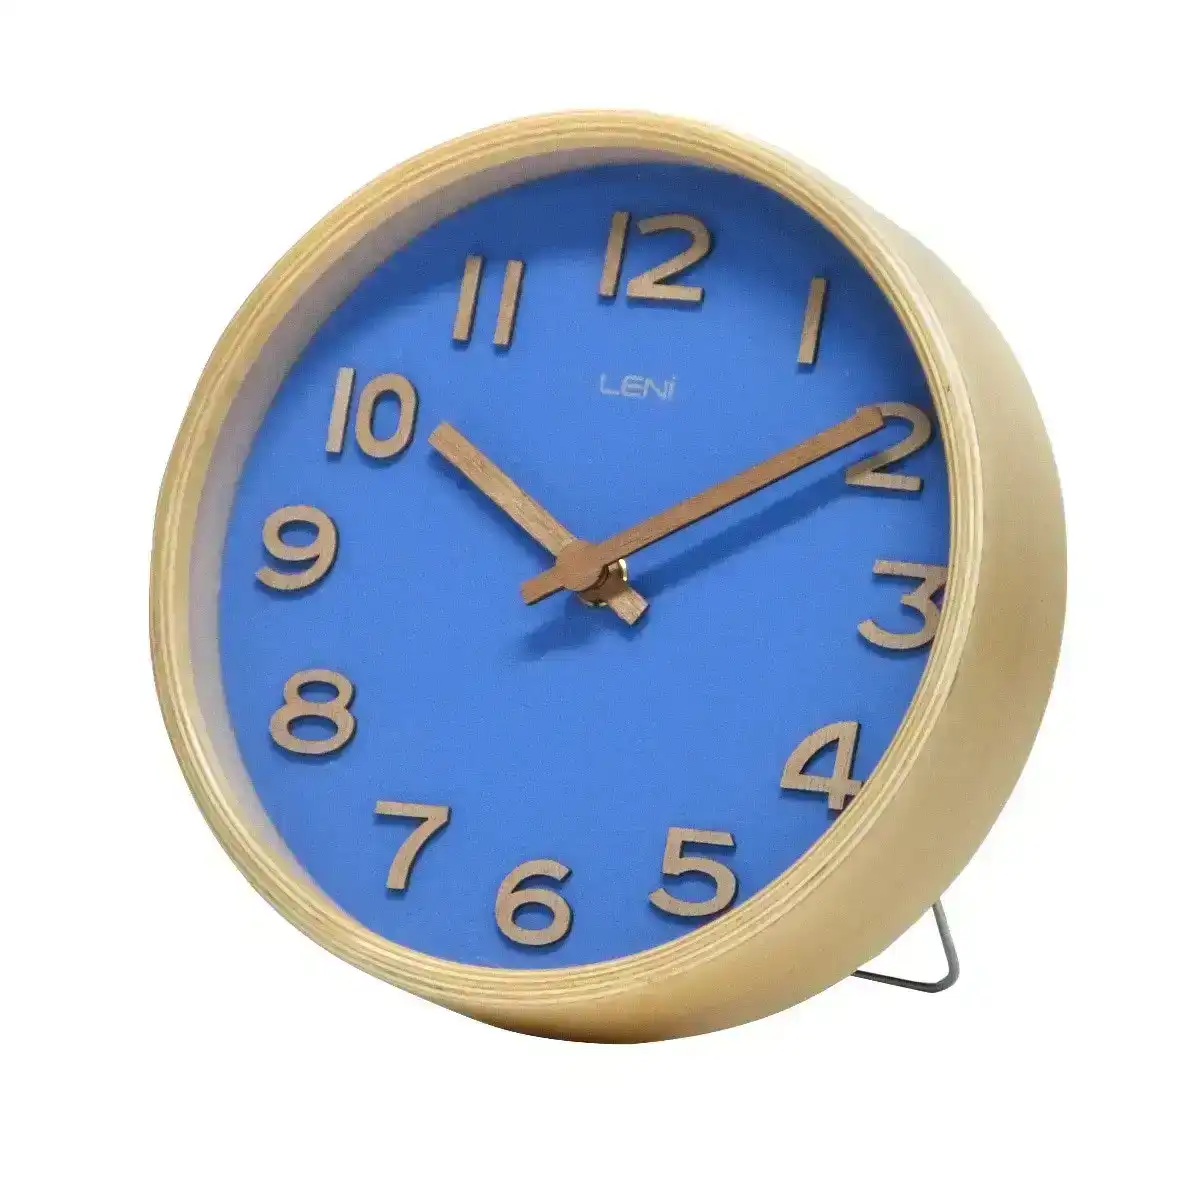 Leni Wooden 18cm Analogue Table/Desk Hanging Wall Clock Home/Office Decor Navy